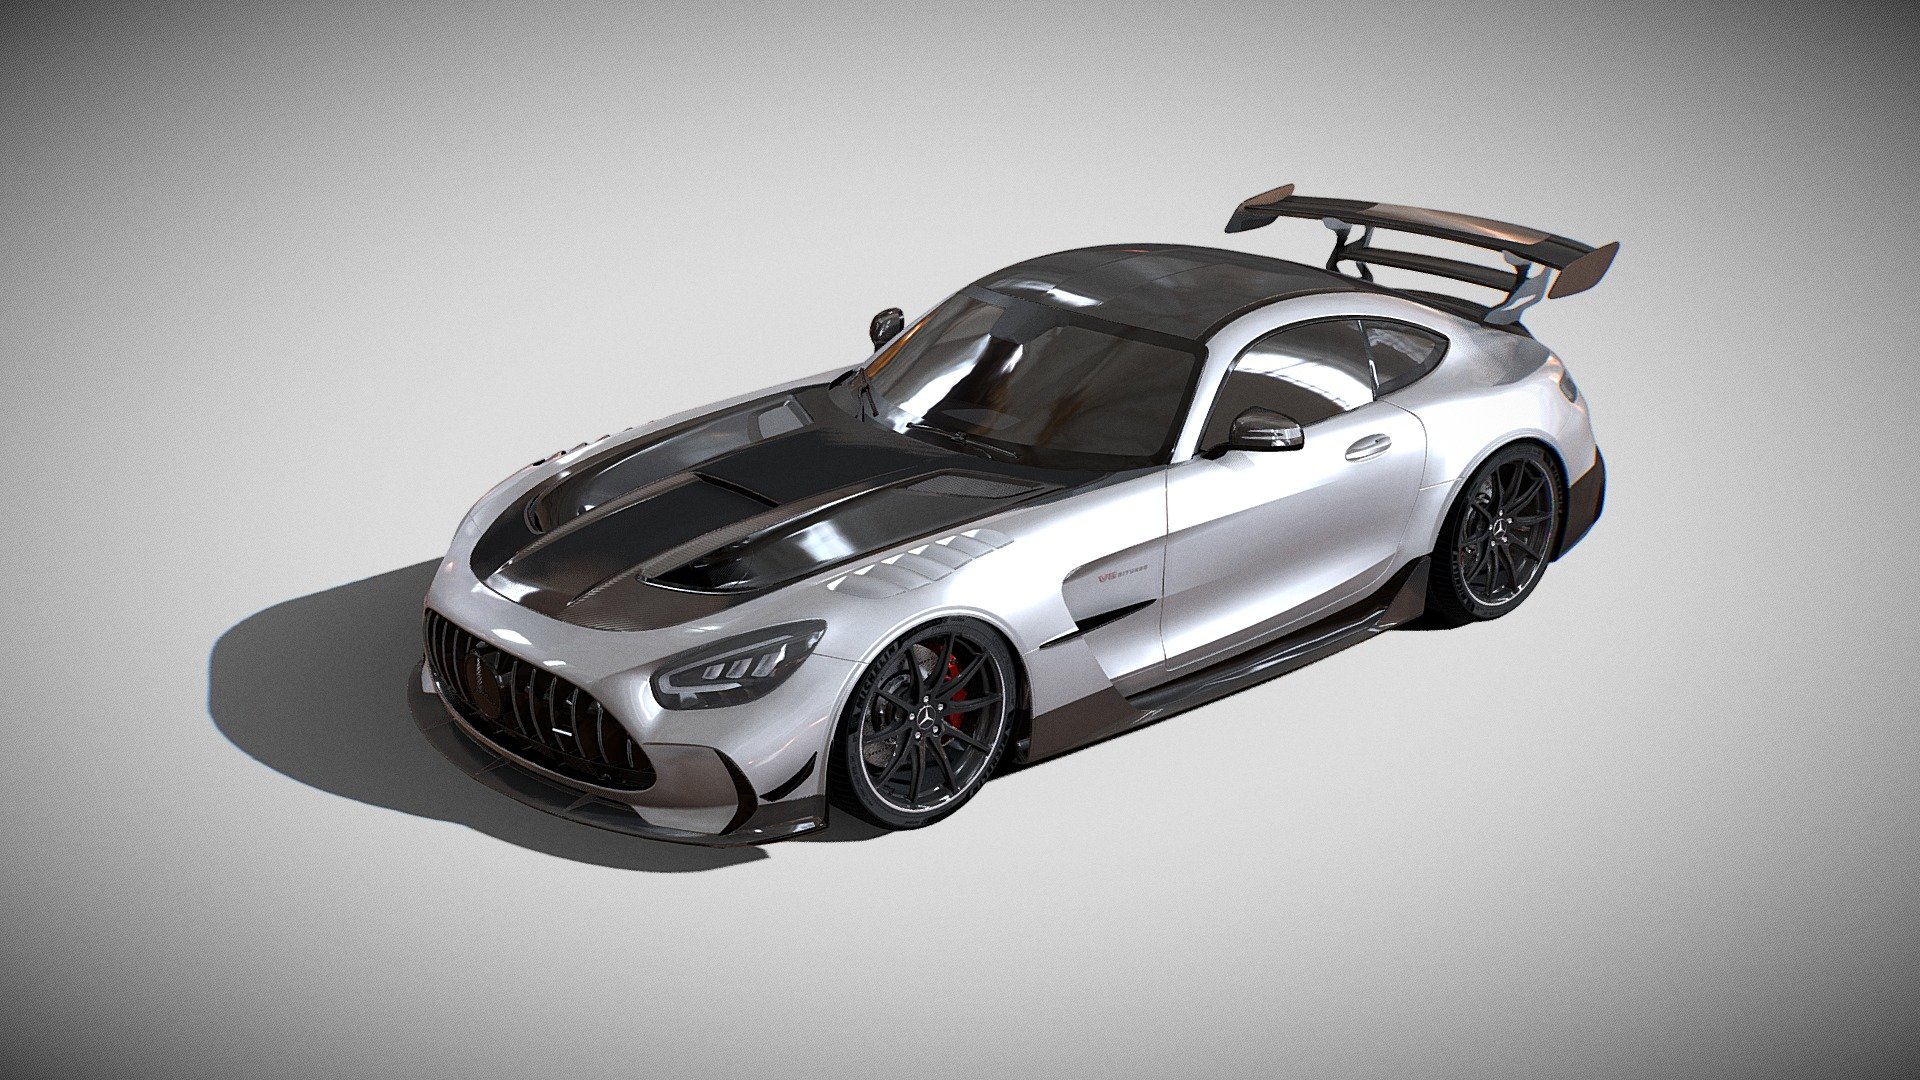 A low-polygon model of Mercedes-Benz AMG GT 2021-2022 Game ready VR/AR Compatible.

Every object has material's name, you can easily change or apply materials. Low Poly can be used in VR,Games Etc

Model is fully textured with based on real object. All textures and materials are included and mapped in every format. Model does not include any backgrounds or scenes used in preview images. Renders made with Blender in Cycles.

This model is high quality, photo realalistic. The model has a fully textured, detailed design that allows for close-up renders, and was originally modeled and Textured in Blender. Fidelity is optimal up to a 4k render

3D model created maximally close to a real Mercedes-Benz car and based on the dimensions from open sources.

All main parts of the model are separated objects.

You can easily change all materials 3d model